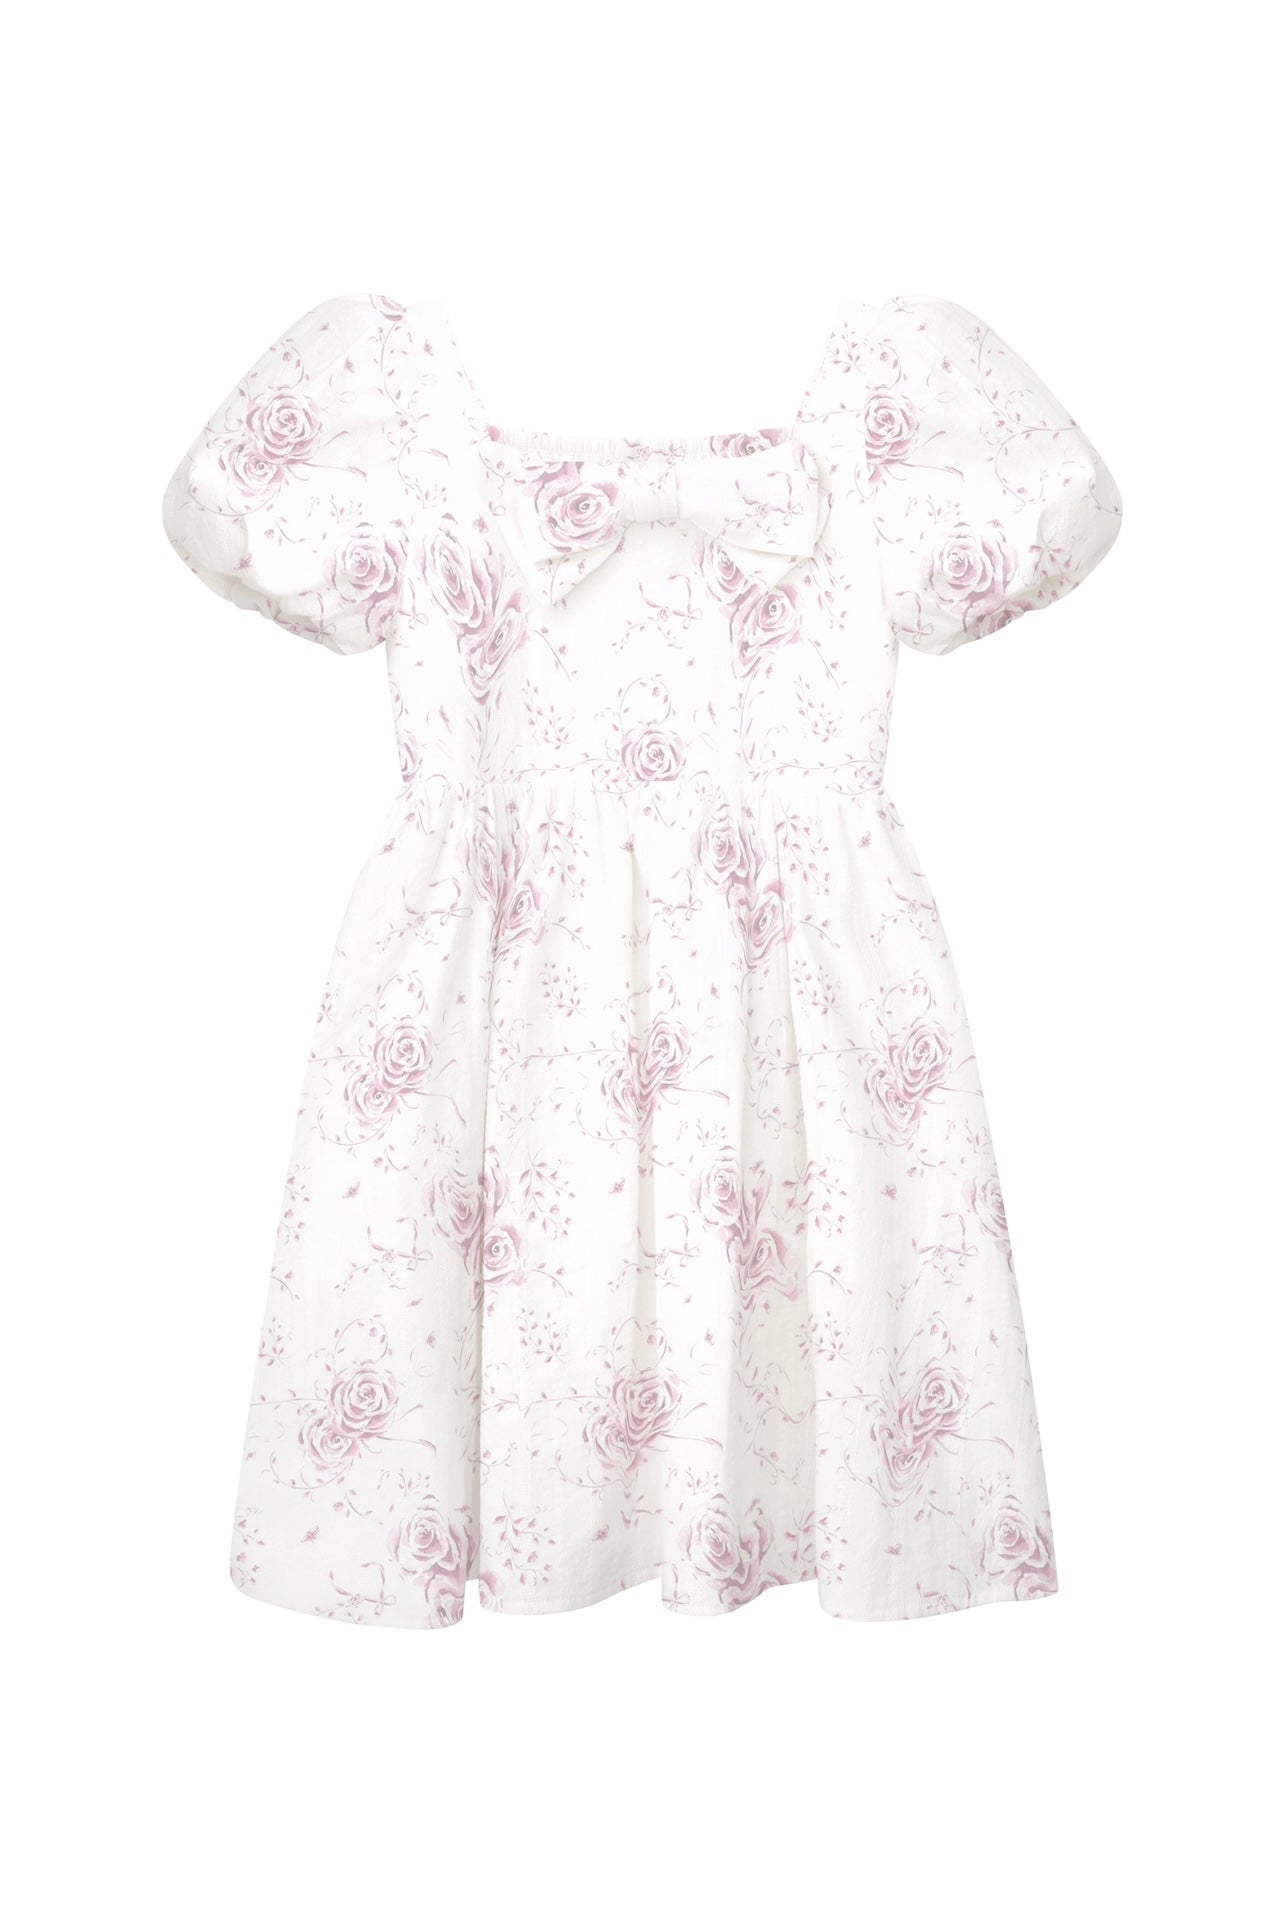 The Kylie Girl Dress by Floraison